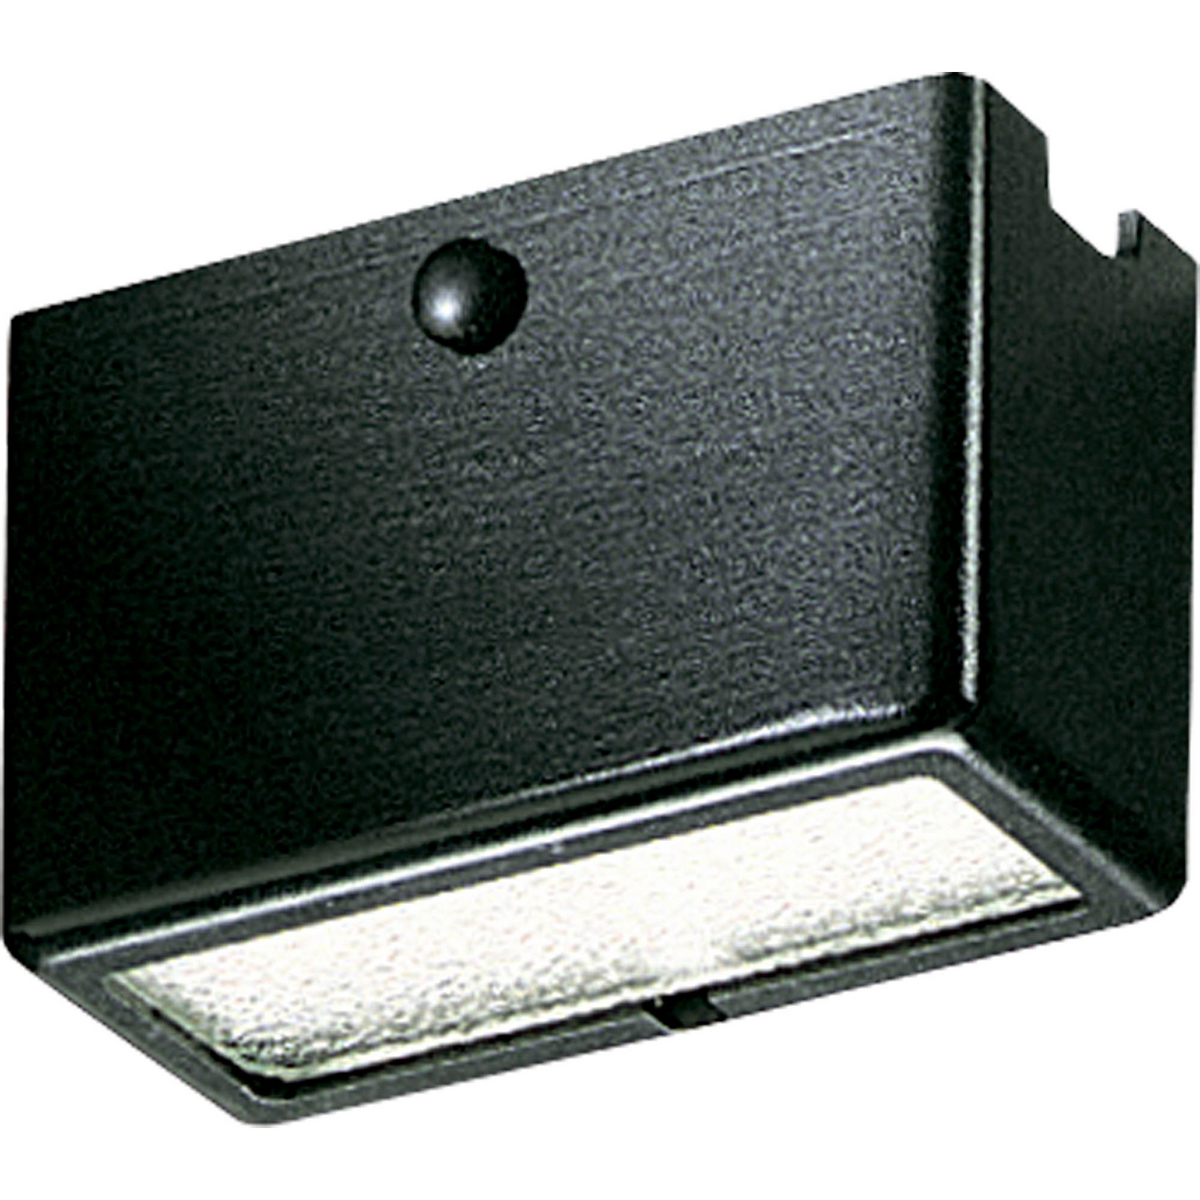 Durable cast aluminum low voltage deck light is powder-coat painted for superior resistance to chipping, fading and the effects of salt air. Easy installation on continuous runs of #12 and #16 cable. Mounts under railings. 12-volt. Units must be wired to a 12V transformer with proper capacity.